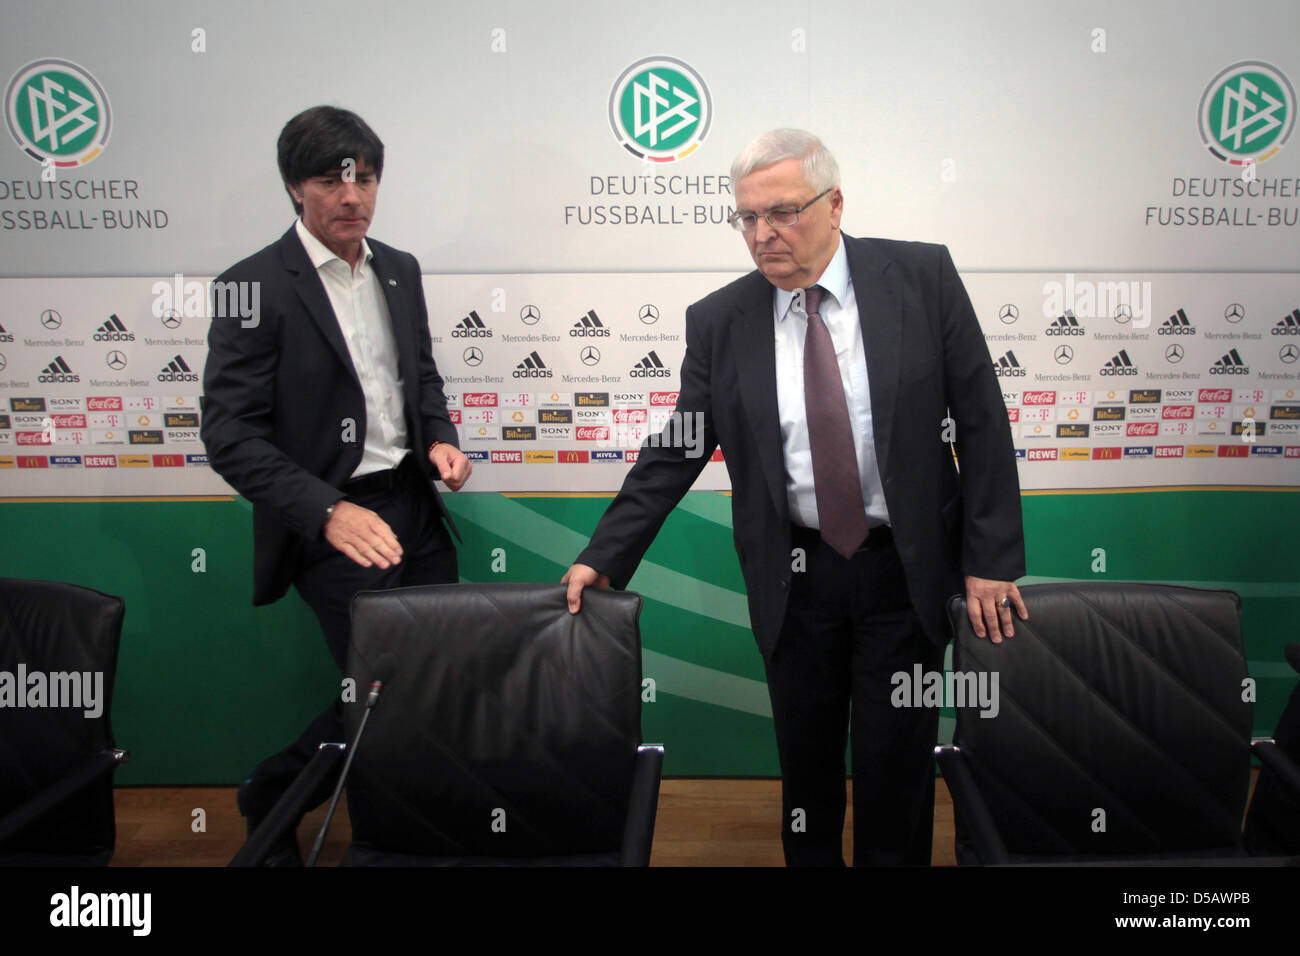 The president of the German football association Theo Zwanziger (R) adjusts a chair for the Coach of the German national football team, Joachim Loew at a press conference at the headquarters of the DFB in Frankfurt/Main, Germany, 20 July 2010. Loew remains coach of the German team. The 50 year-old extended his contract with the DFB until the European Championship in 2012, so did te Stock Photo